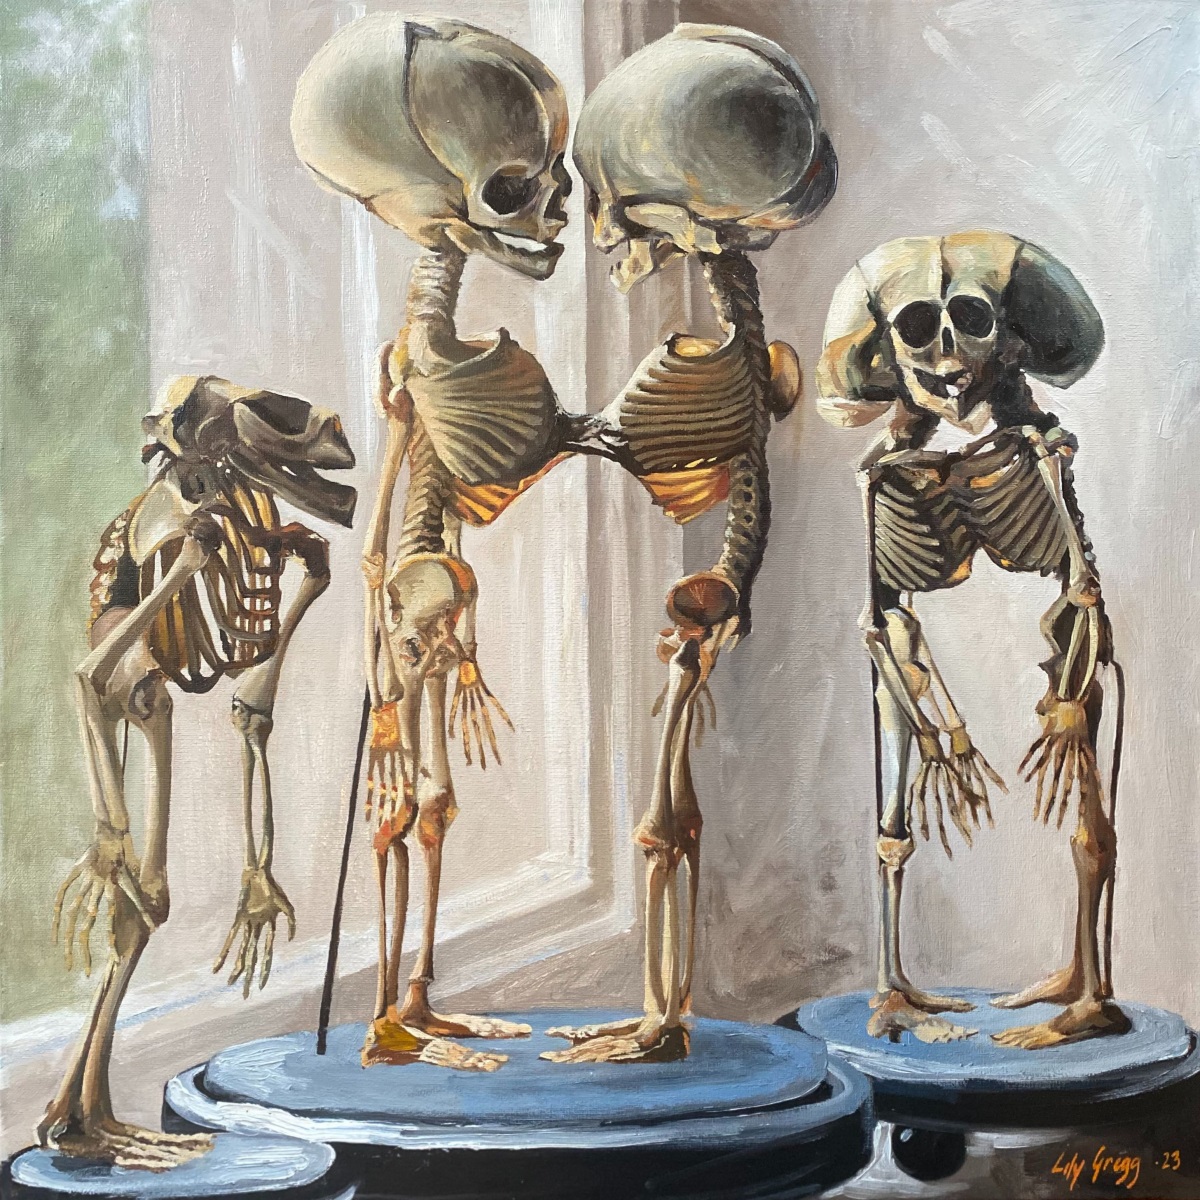 A painting featuring four small human-like skeletons atop pedestals.